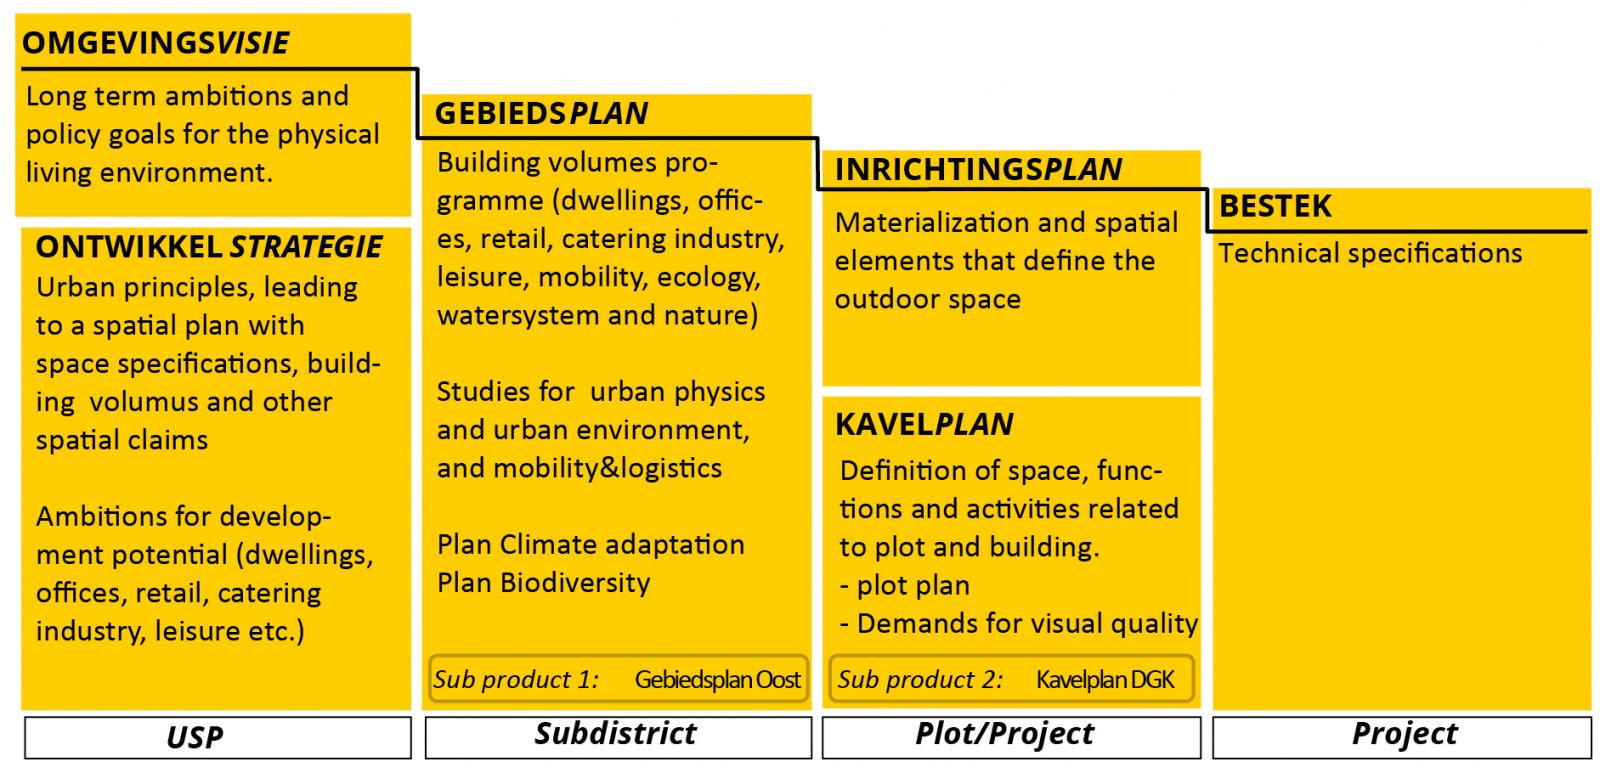 Overview of area development planning process